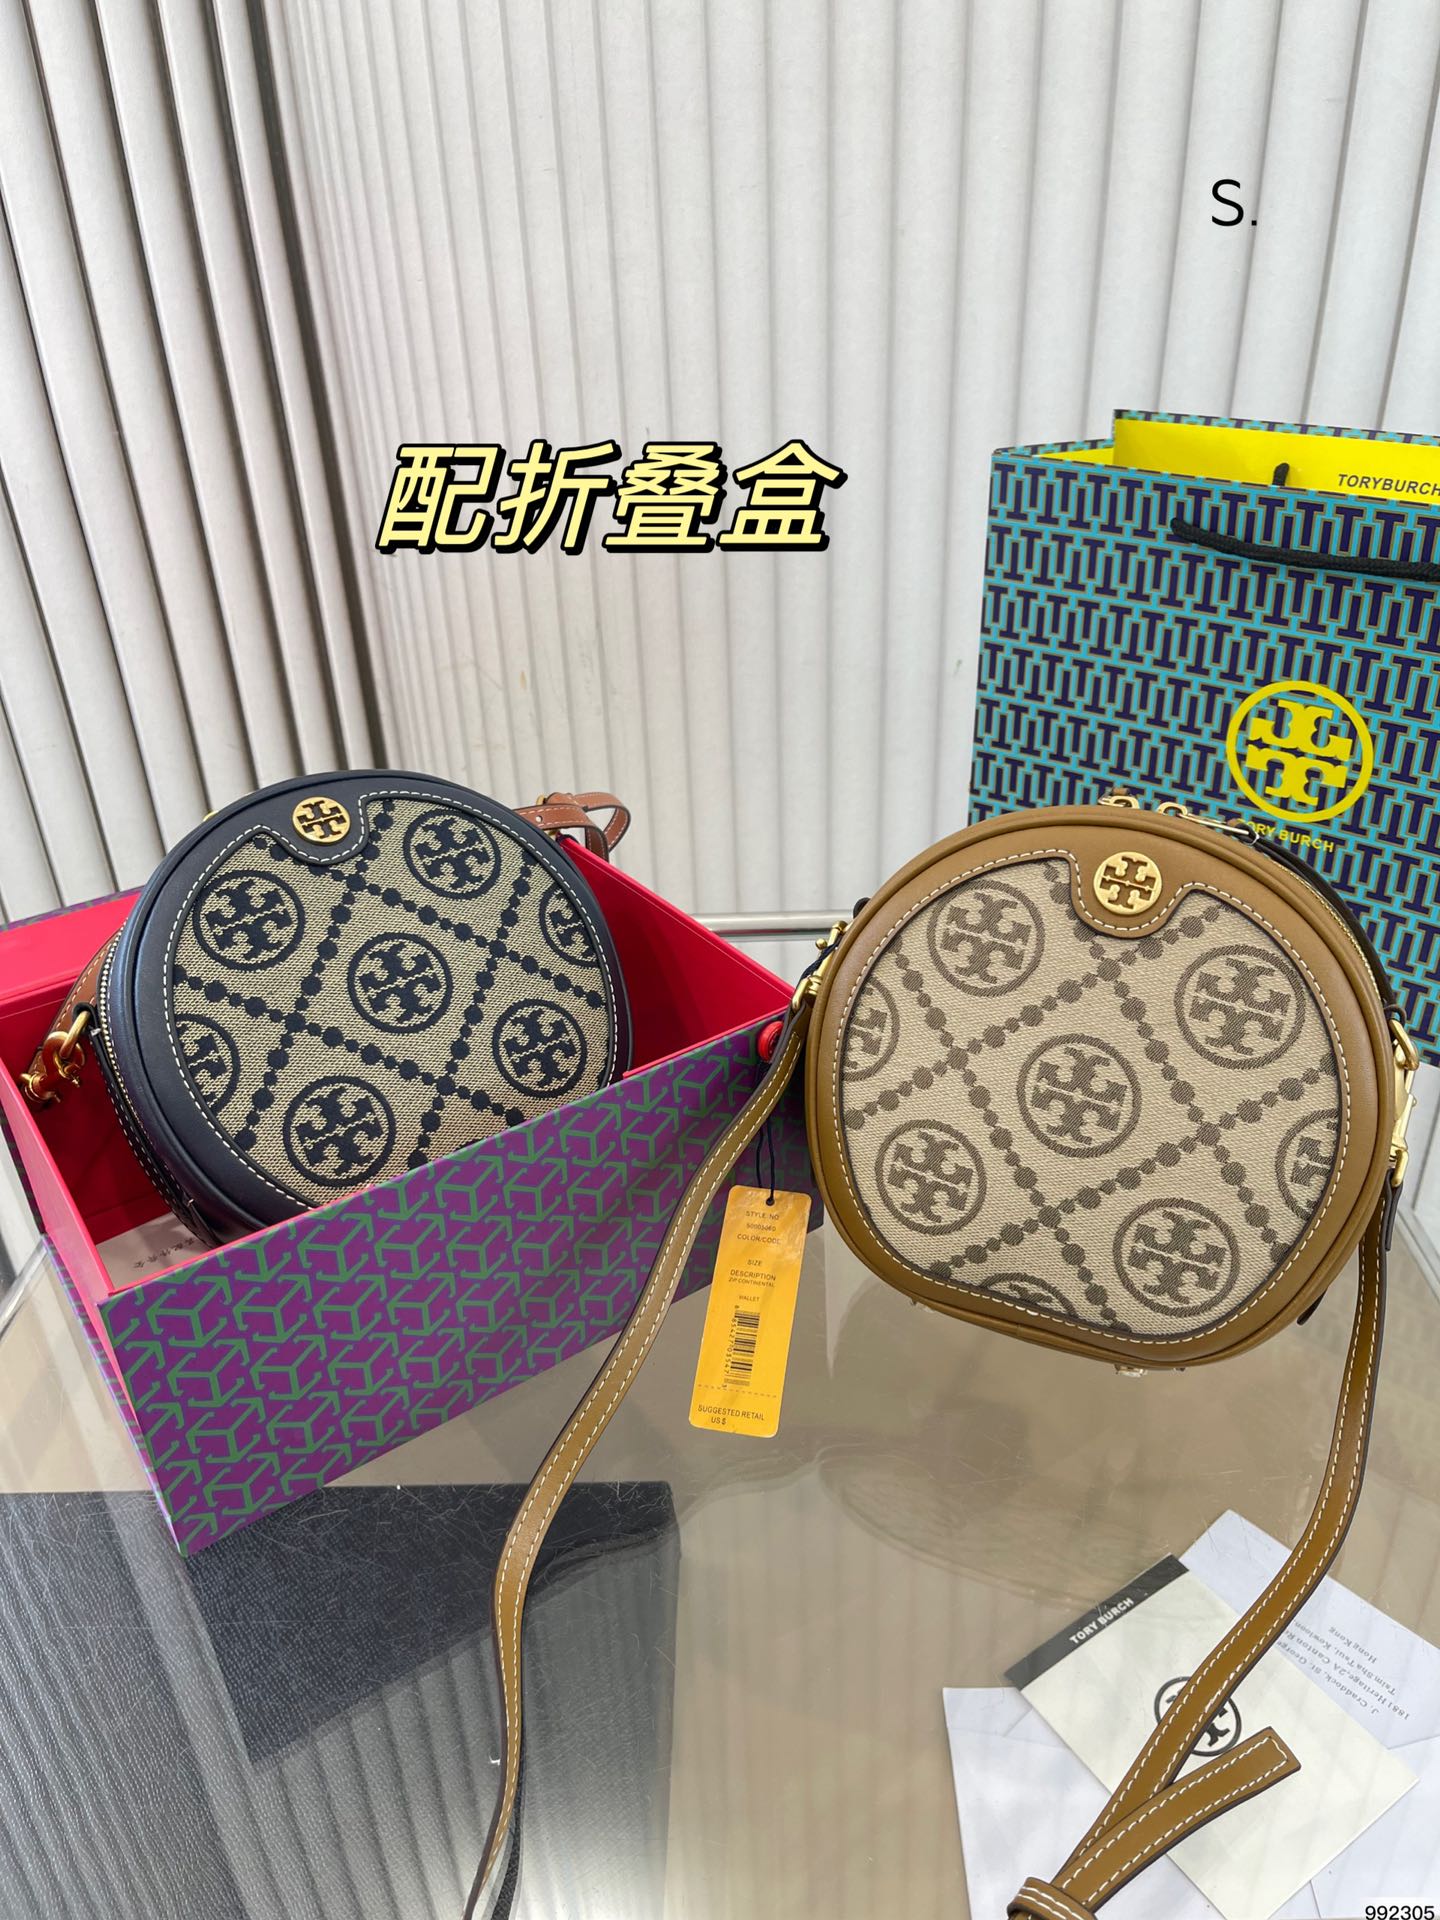 Tory Burch Cylinder & Round Bags